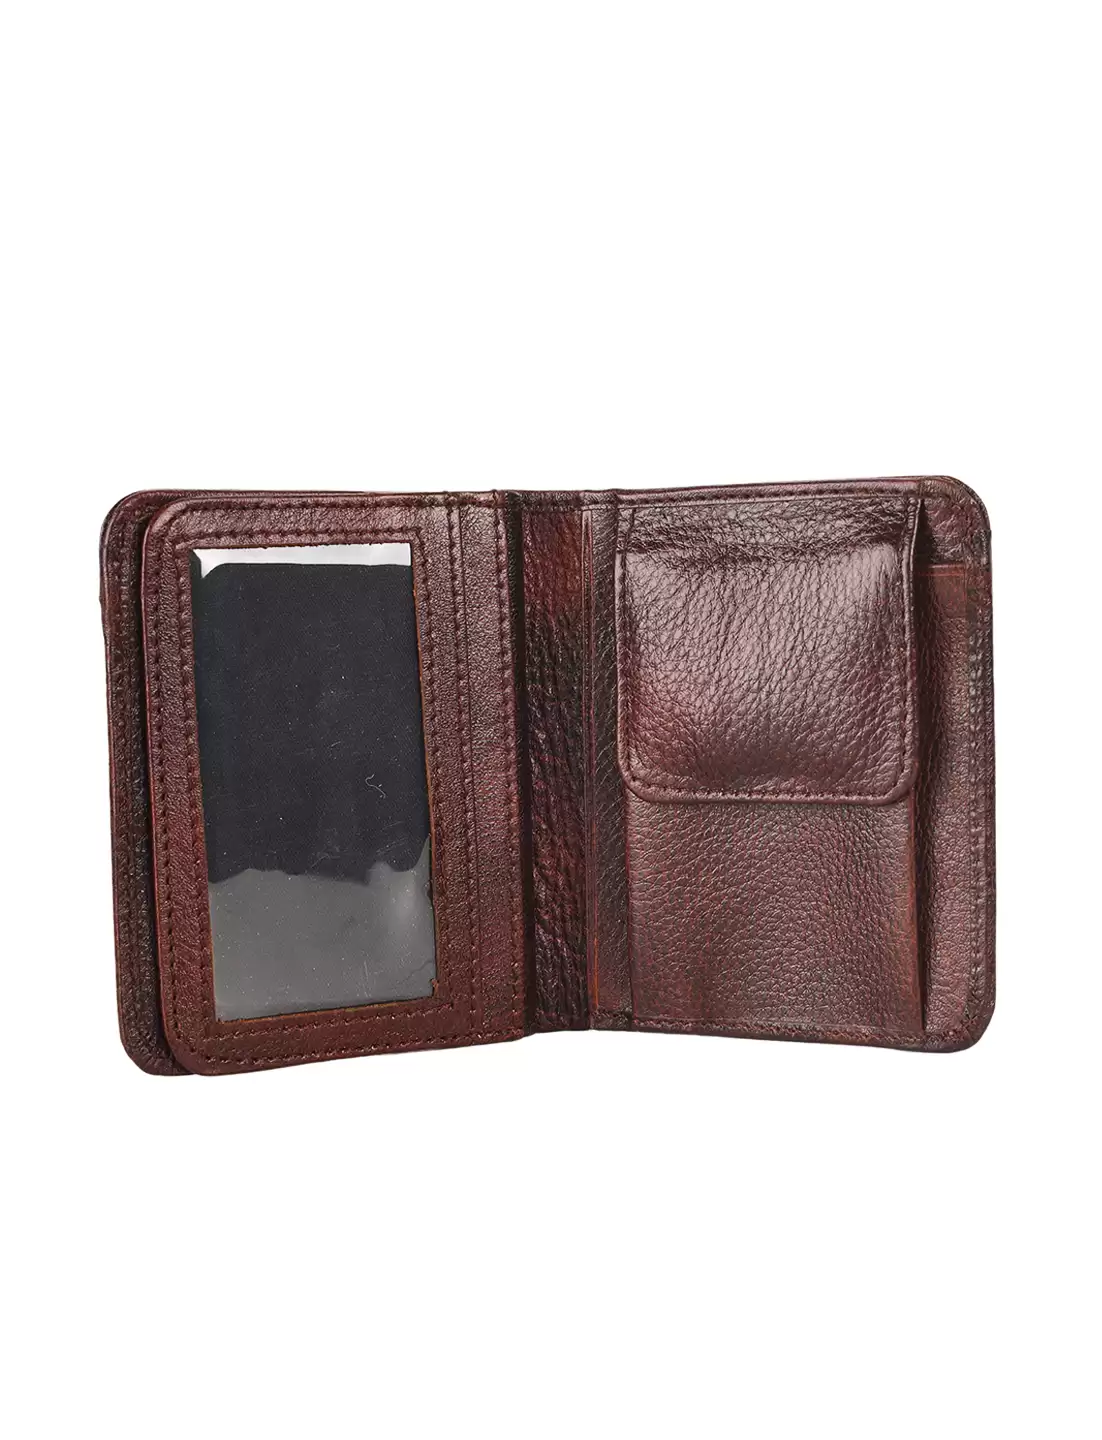 Buy Cross Black Men's Wallet Stylish Genuine Leather Wallets for Men Latest Gents  Purse with Card Holder Compartment (AC948799_3-1) at Amazon.in